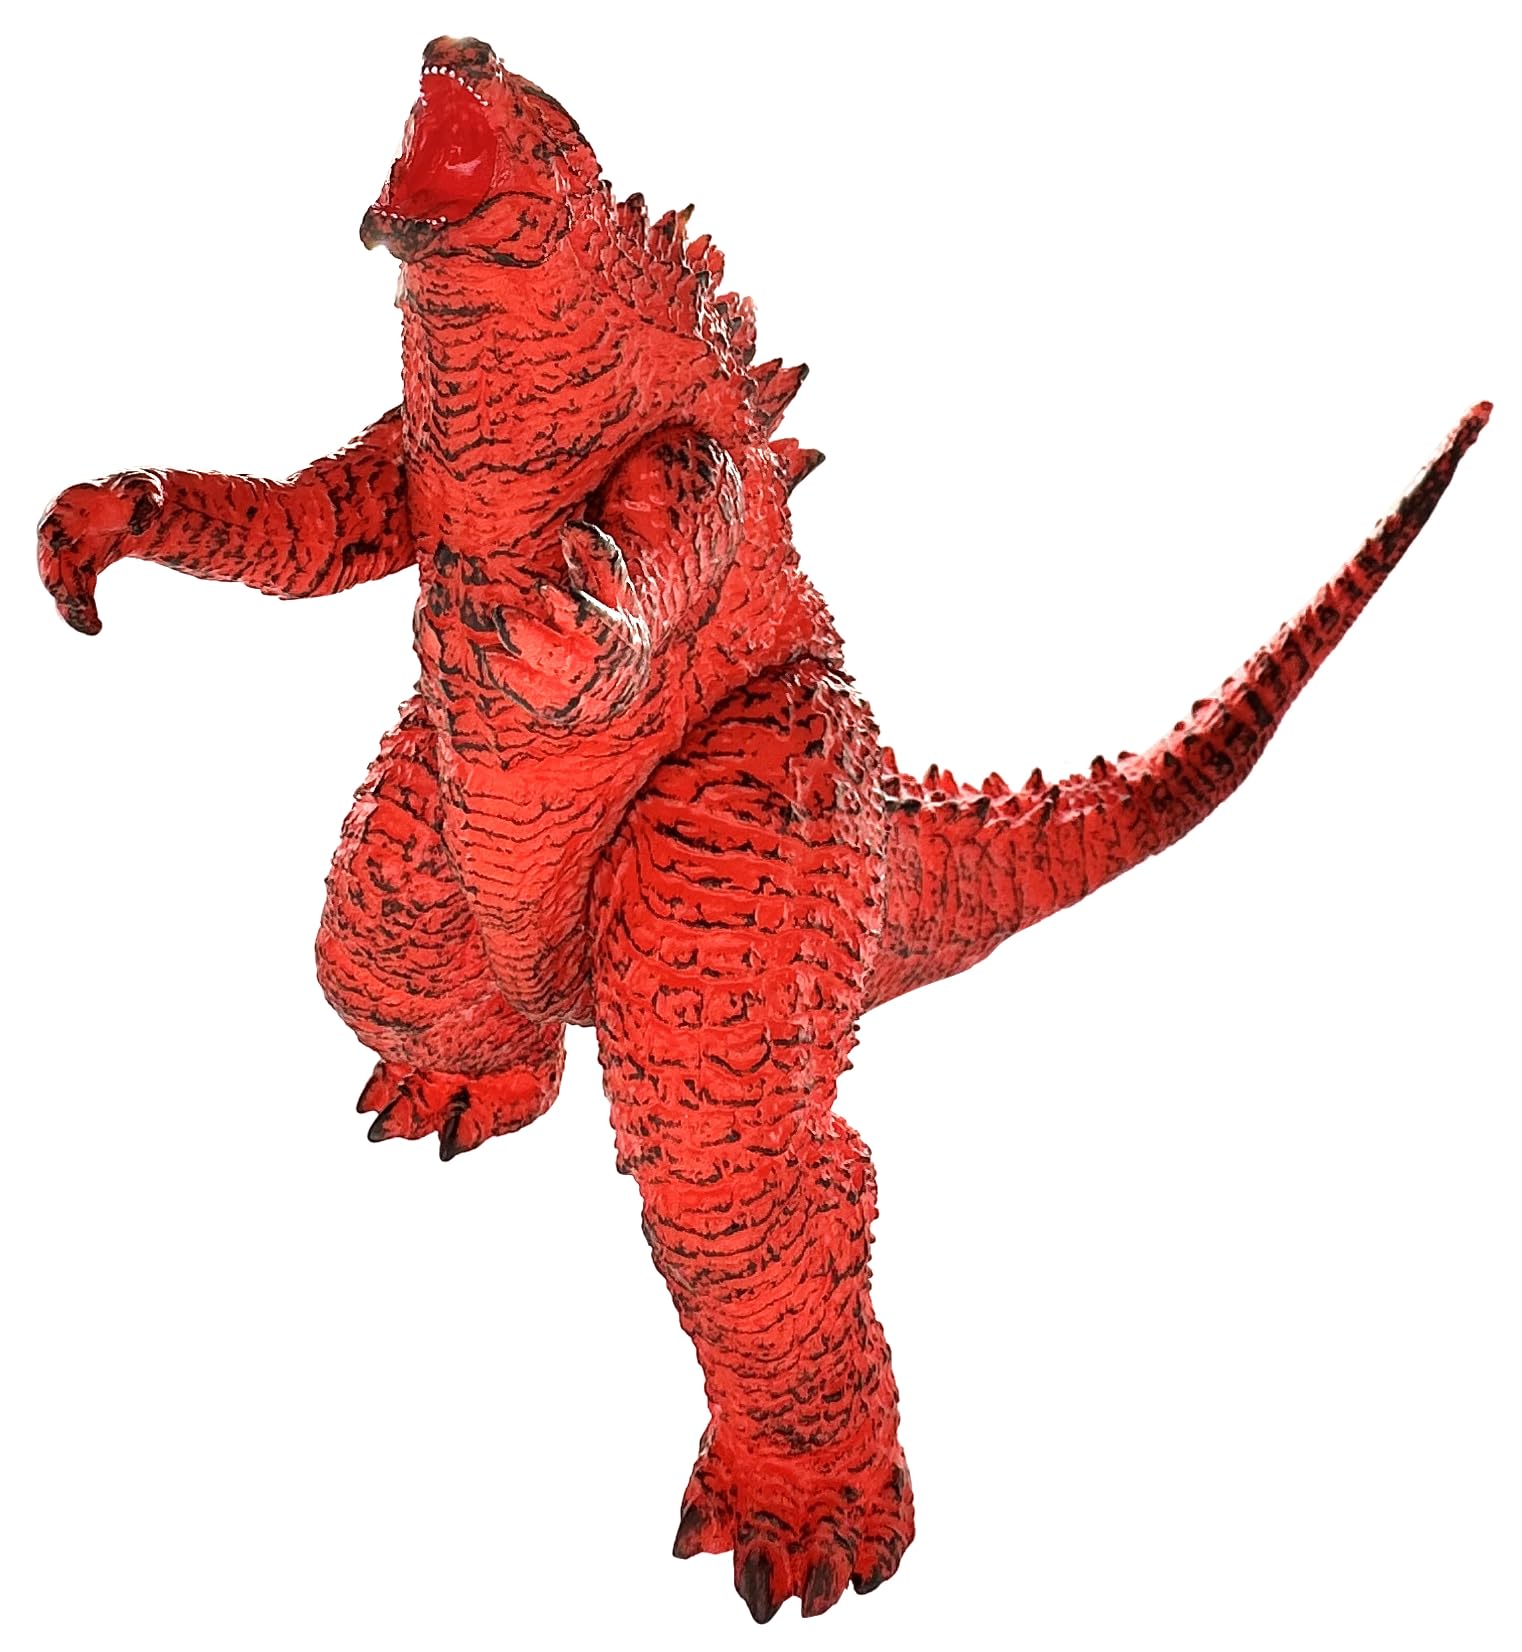 TwCare Fire Godzilla vs. Kong 2021 Toy Burning Action Figure: Flaming King of The Monsters, Movie Series Movable Joints Soft Vinyl, Travel Bag